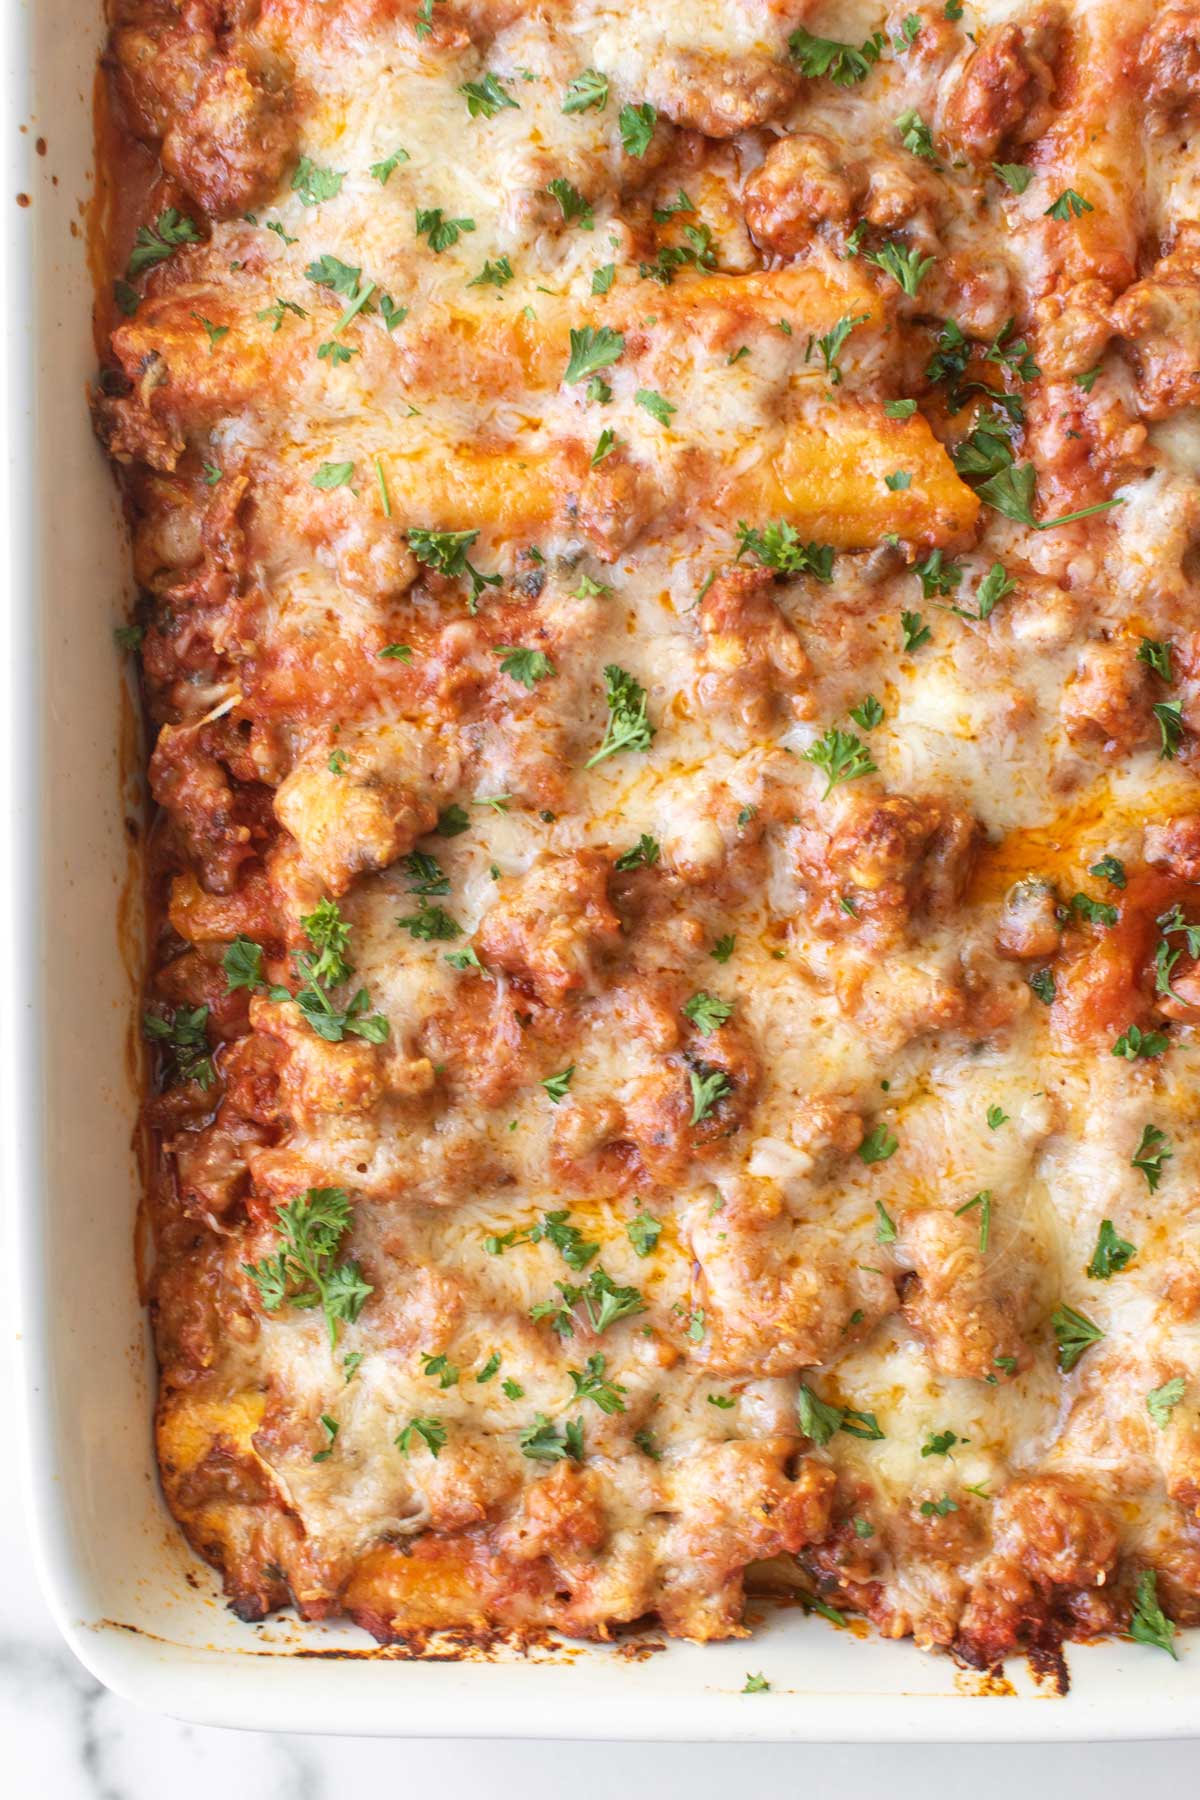 baked manicotti in a pan.